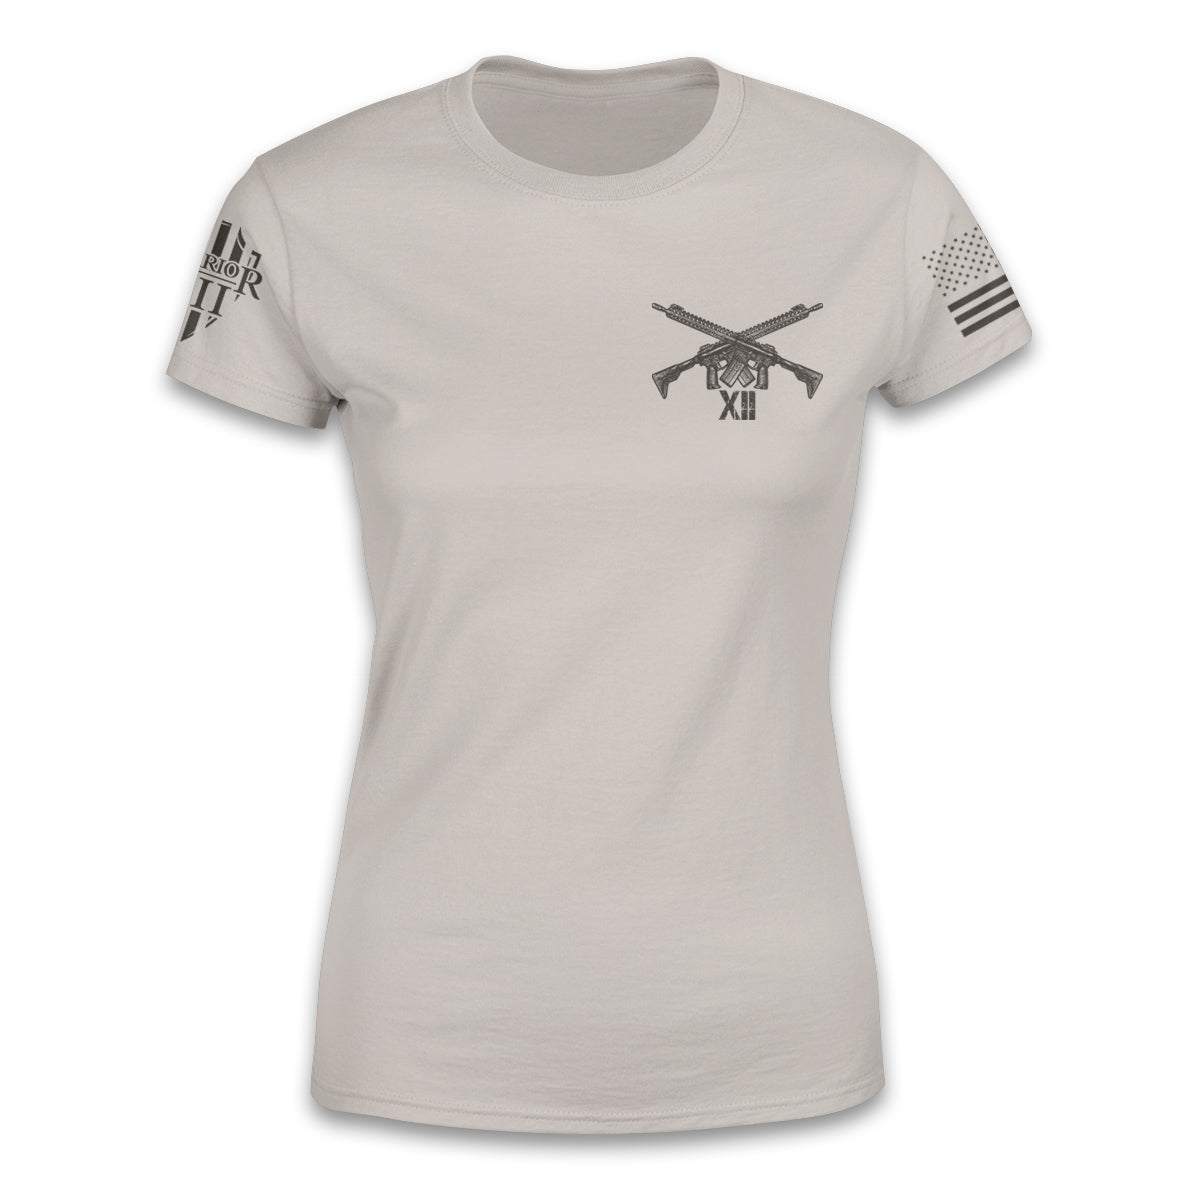 A light tan women relaxed fit shirt with two guns crossed over printed on the front.